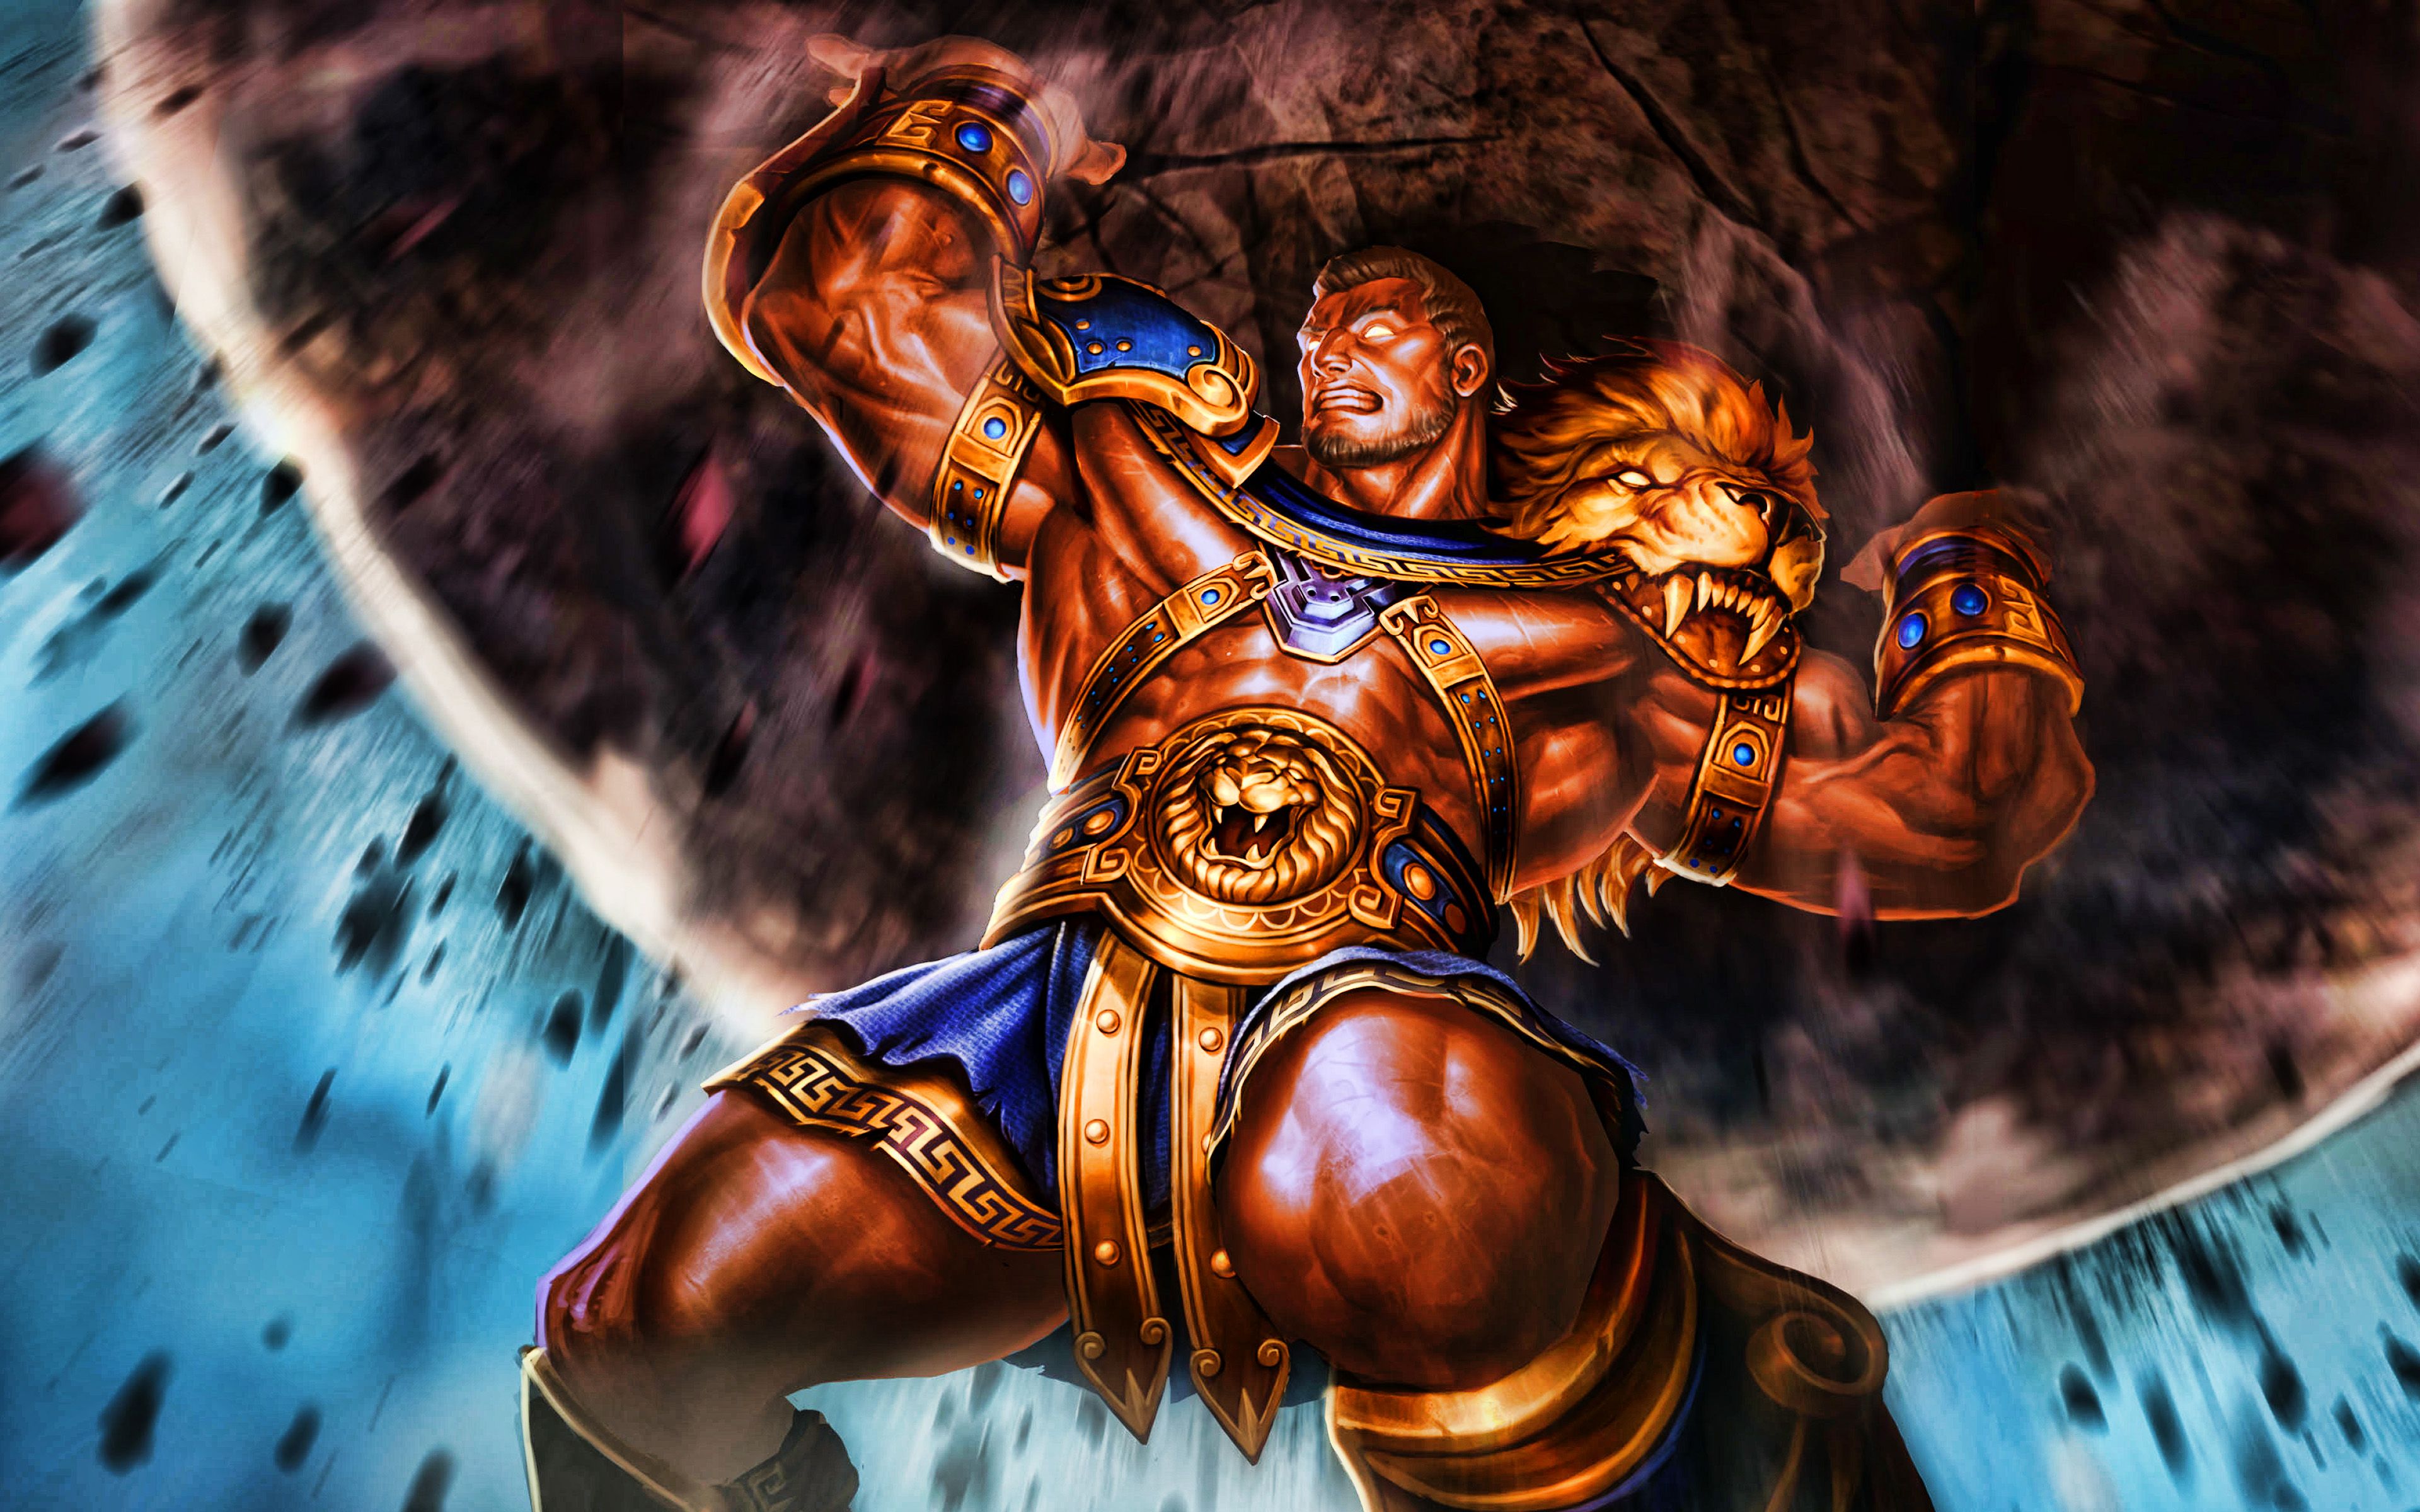 Download wallpaper 4k, Hercules, battle, 2019 games, Smite God, Smite, MOBA, Smite characters, warriors, Hercules Smite for desktop with resolution 3840x2400. High Quality HD picture wallpaper